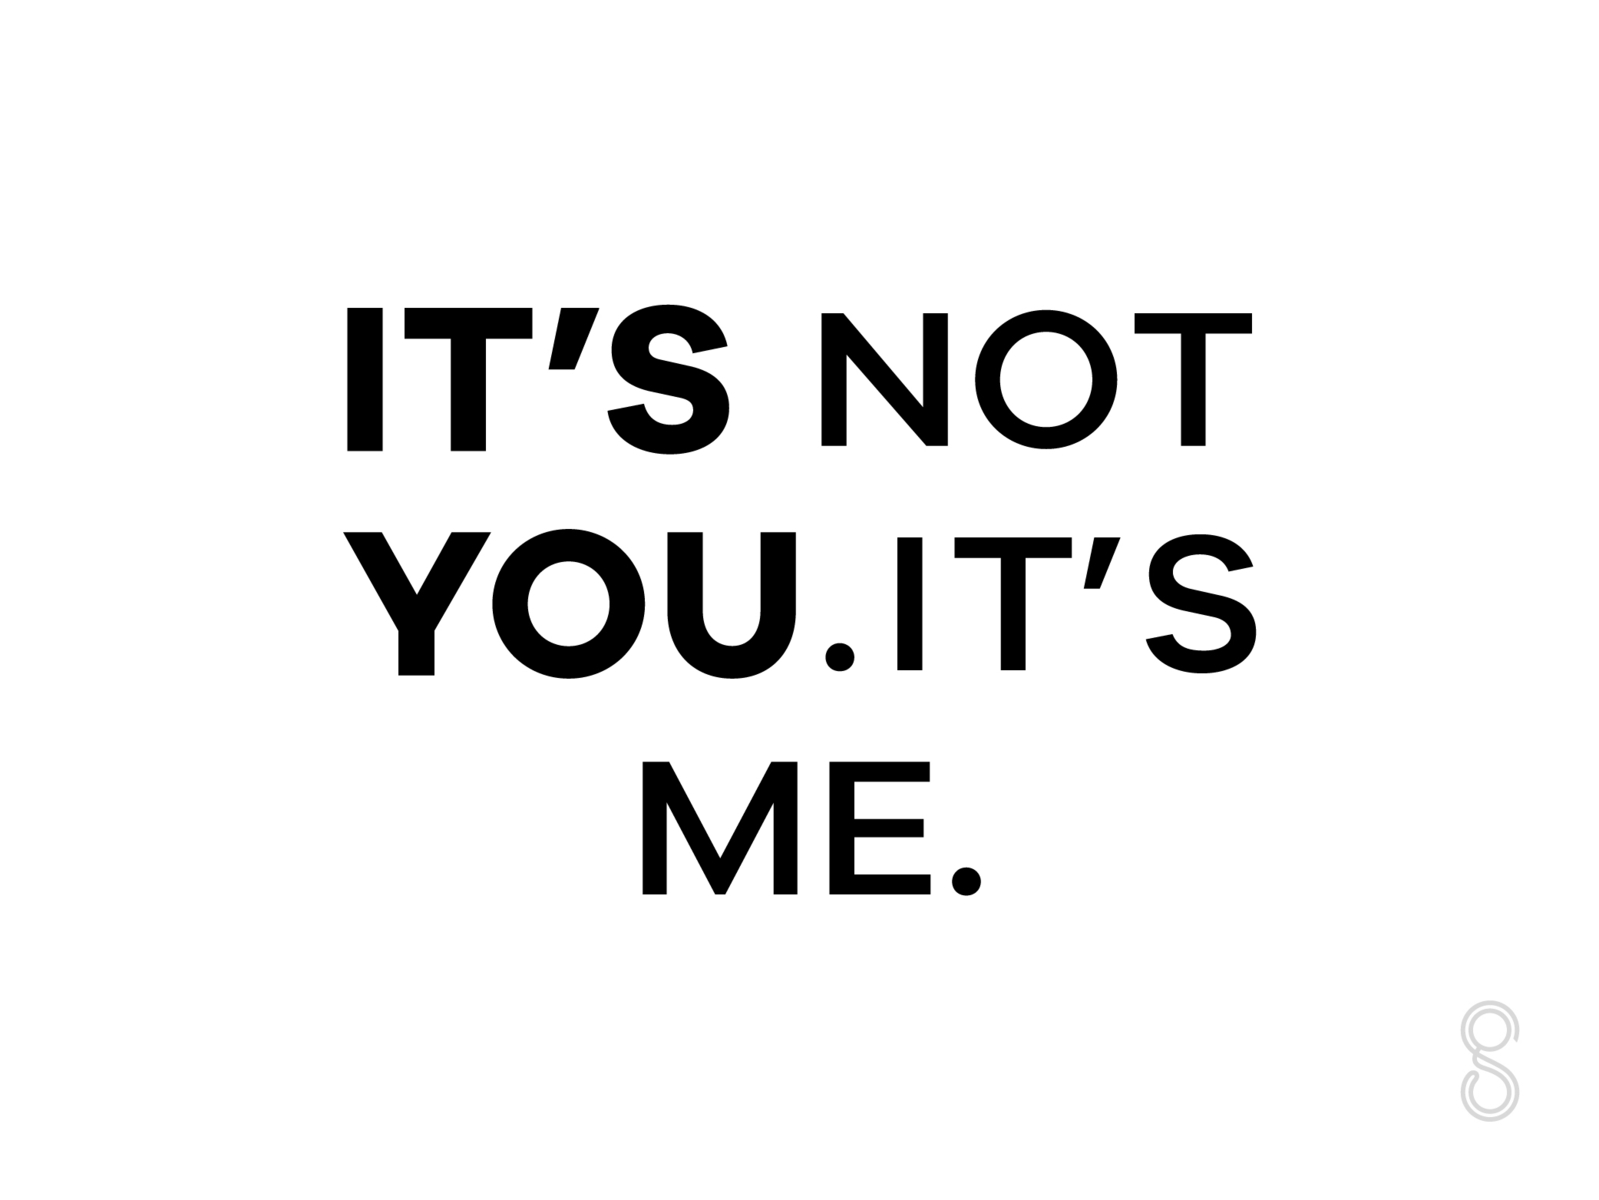 It's not you. It's me. by Samadara Ginige on Dribbble